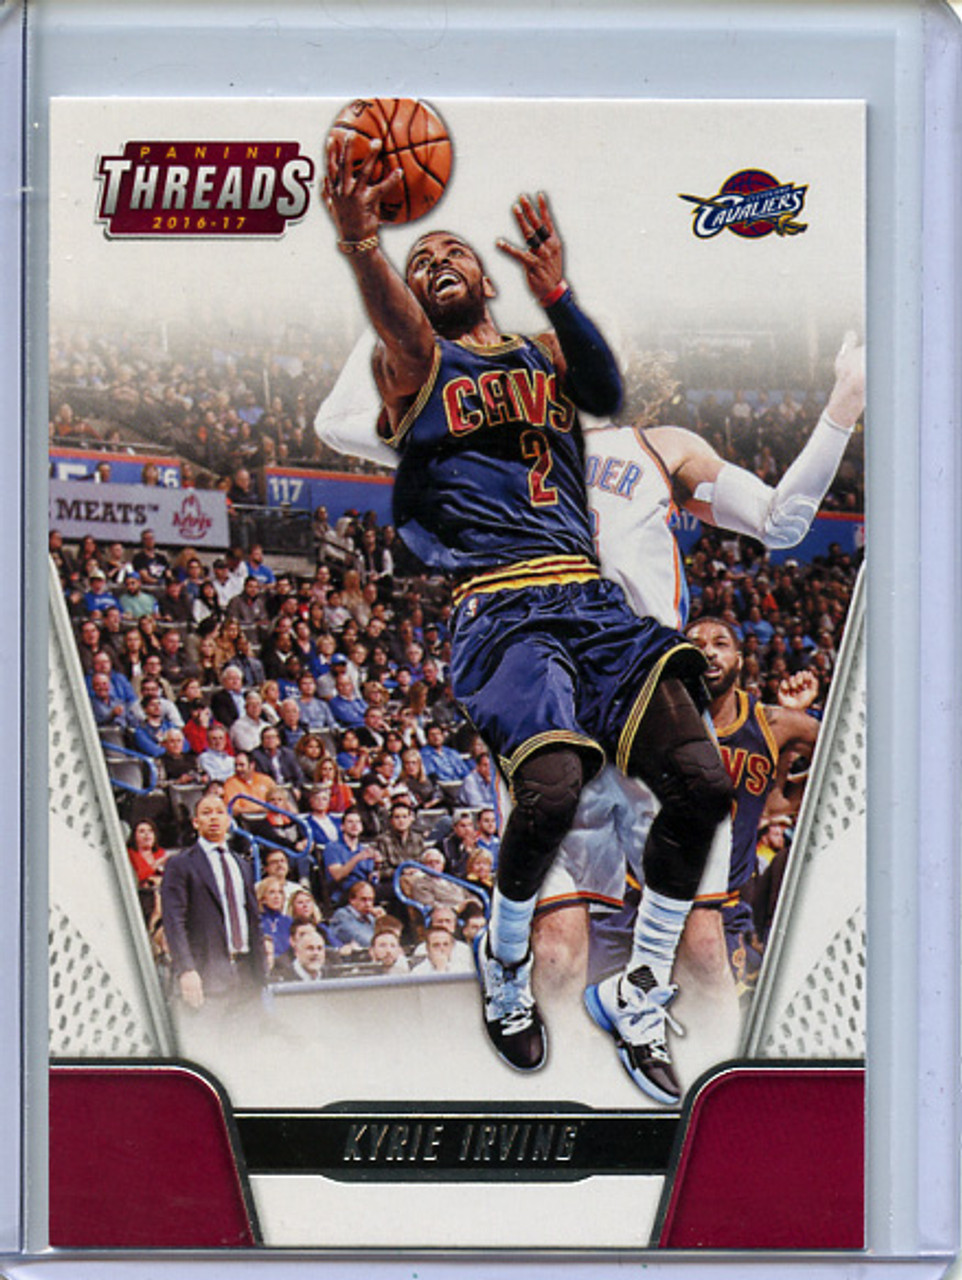 Kyrie Irving 2016-17 Threads #126